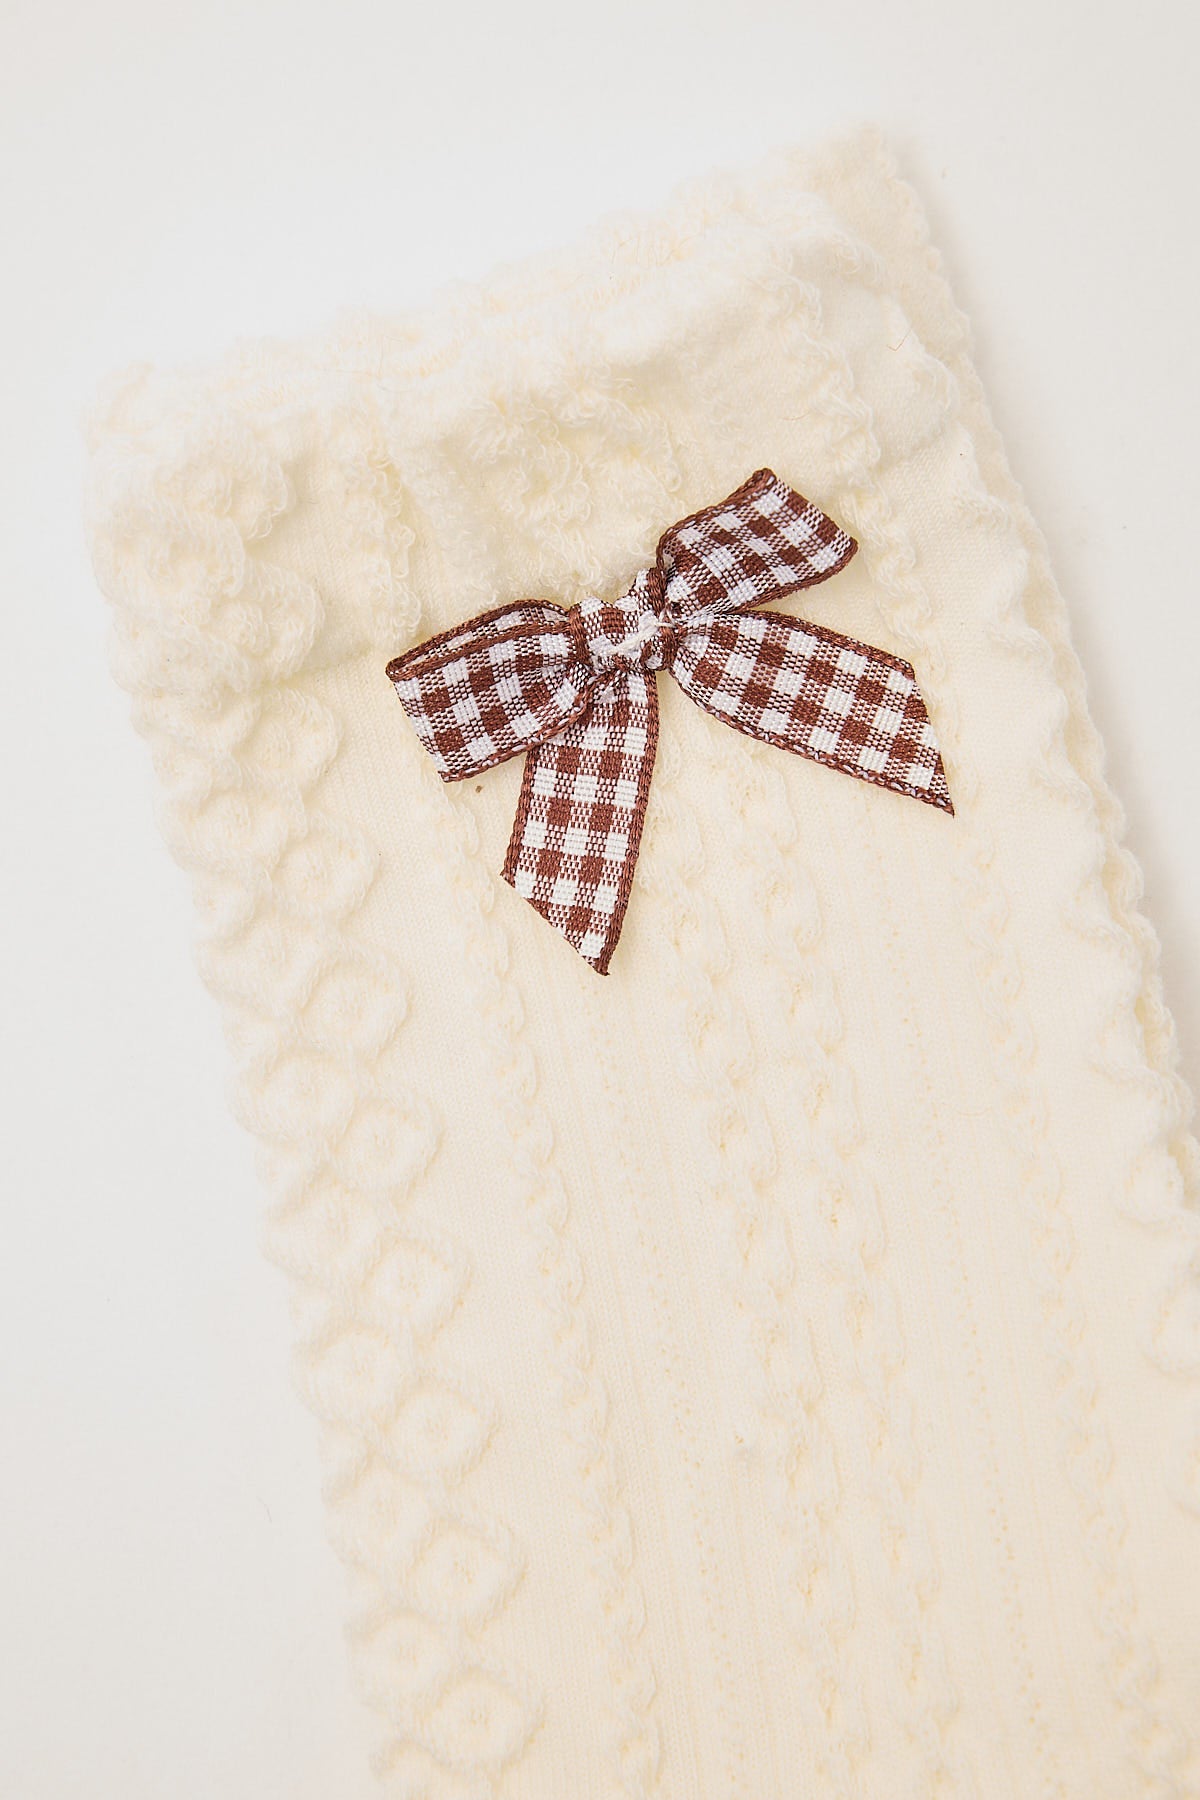 Token Cable Knit Bow Socks Cream and Brown Gingham